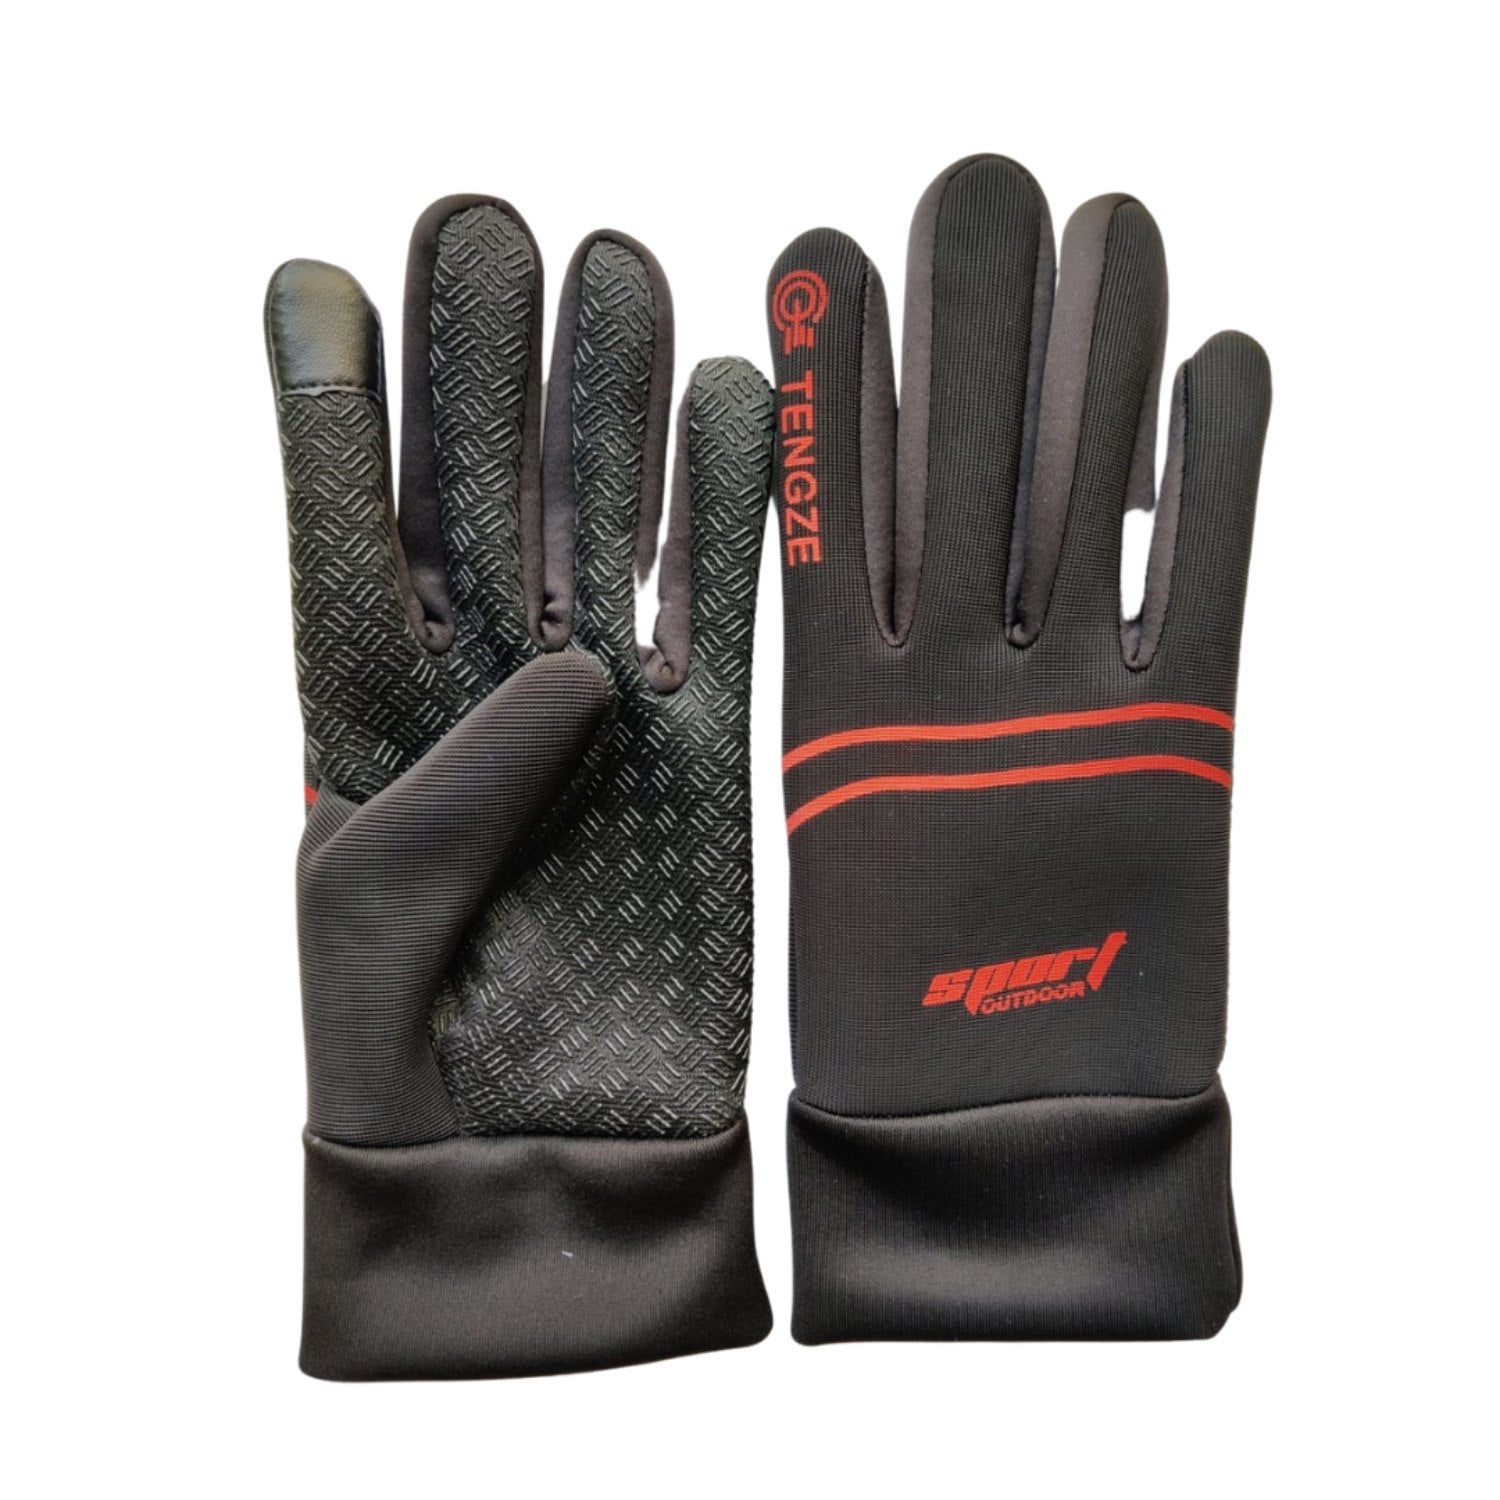 Buy Kaza Cold Weather Windproof Gloves at Gokyo Outdoor Clothing & Gear